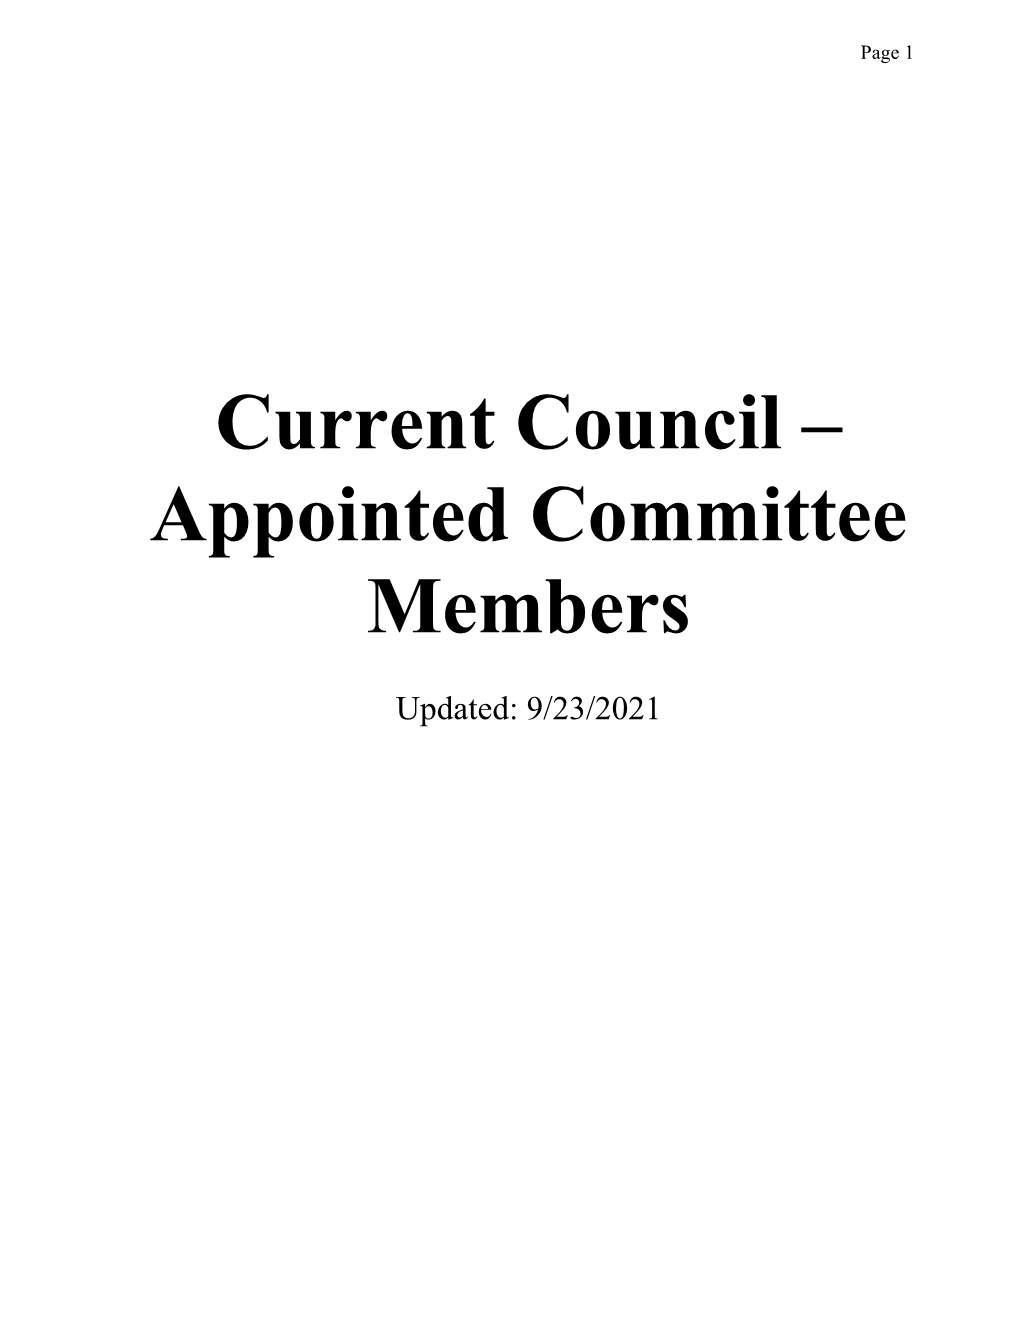 Current Council – Appointed Committee Members